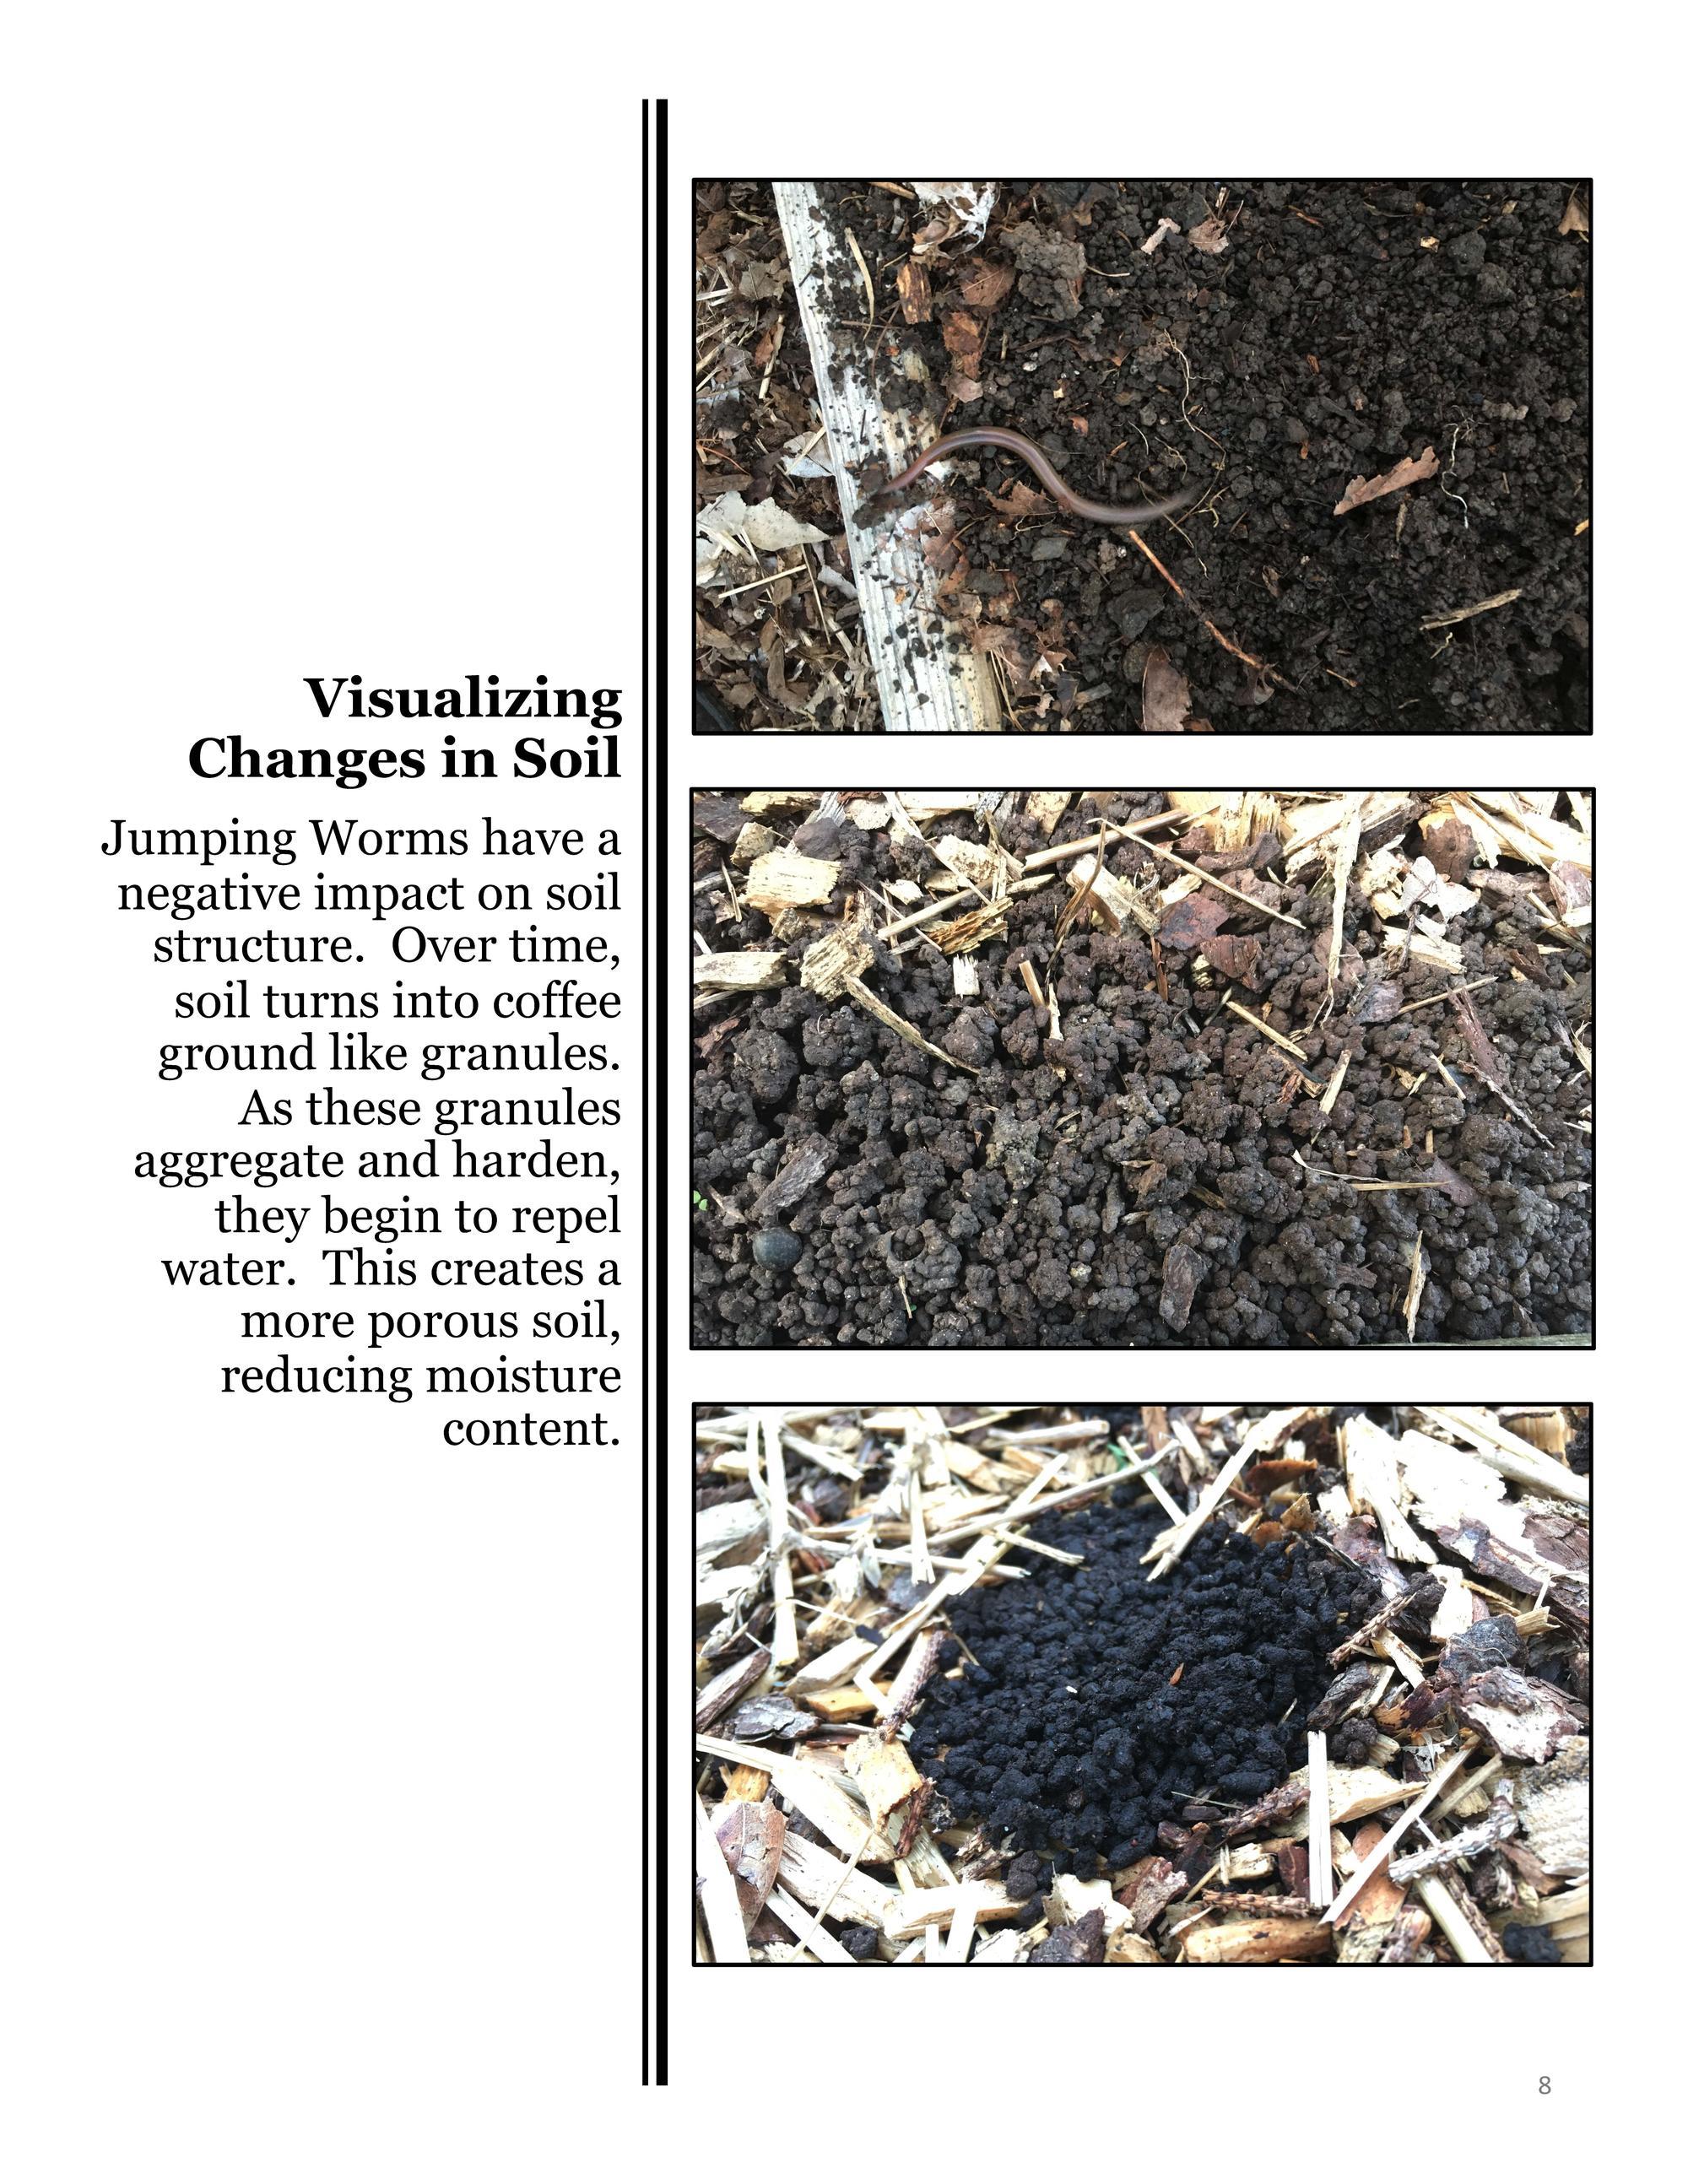 Soil impact of Jumping Worm